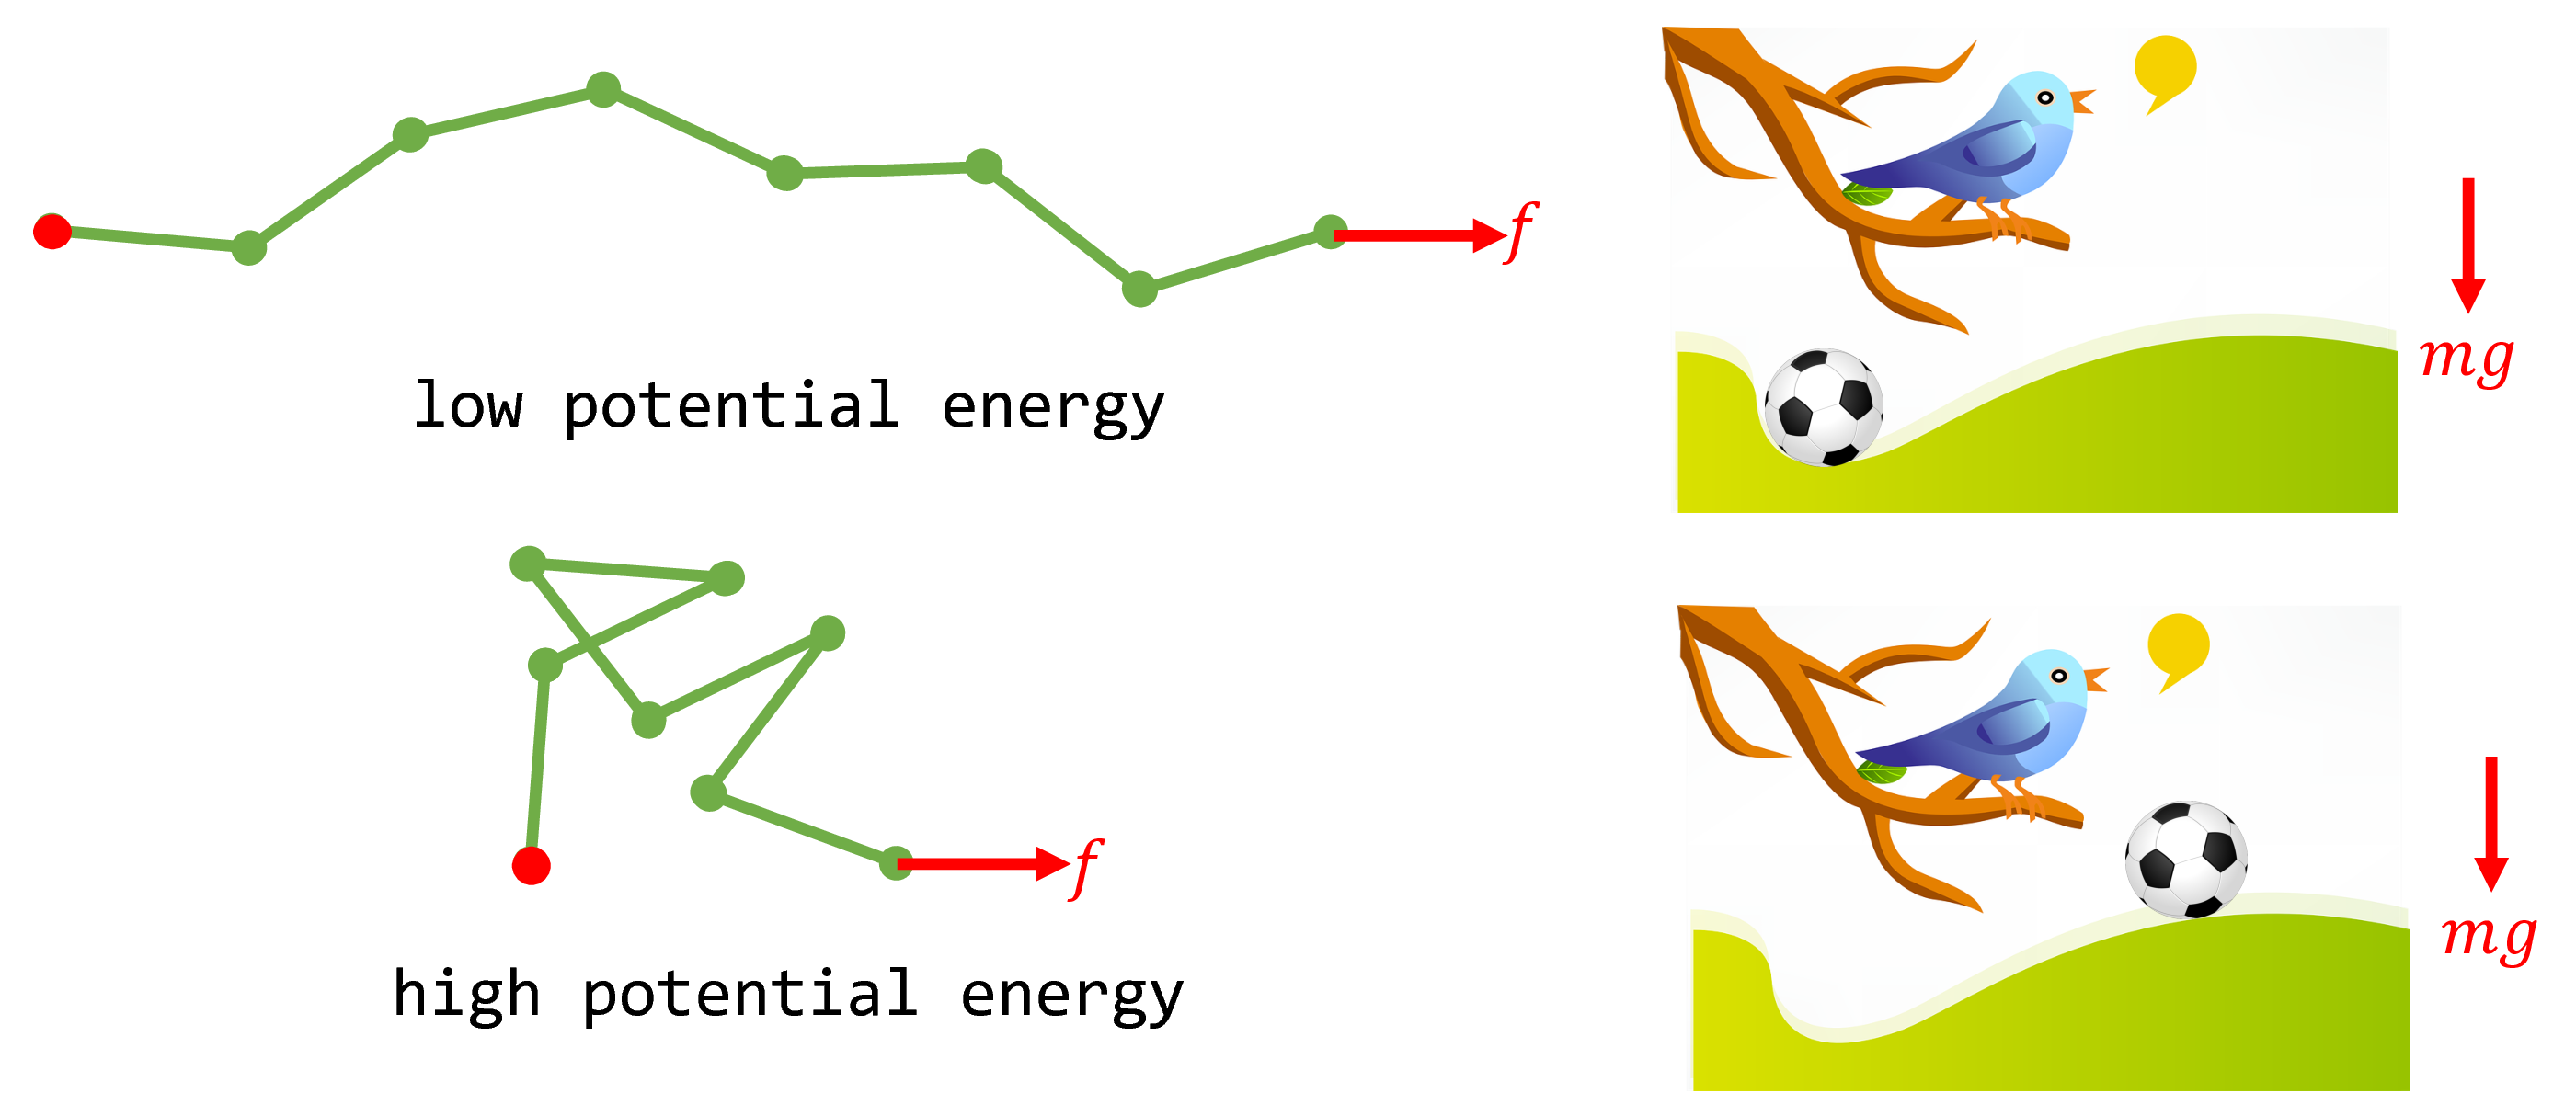 Fig. 3. When the polymer system is subject to the external force $f$, its potential energy is $-fx$. Shown are two example microstates of low and high potential energy and the analogy with a soccer ball on a hill subject to the gravitational force $mg$.